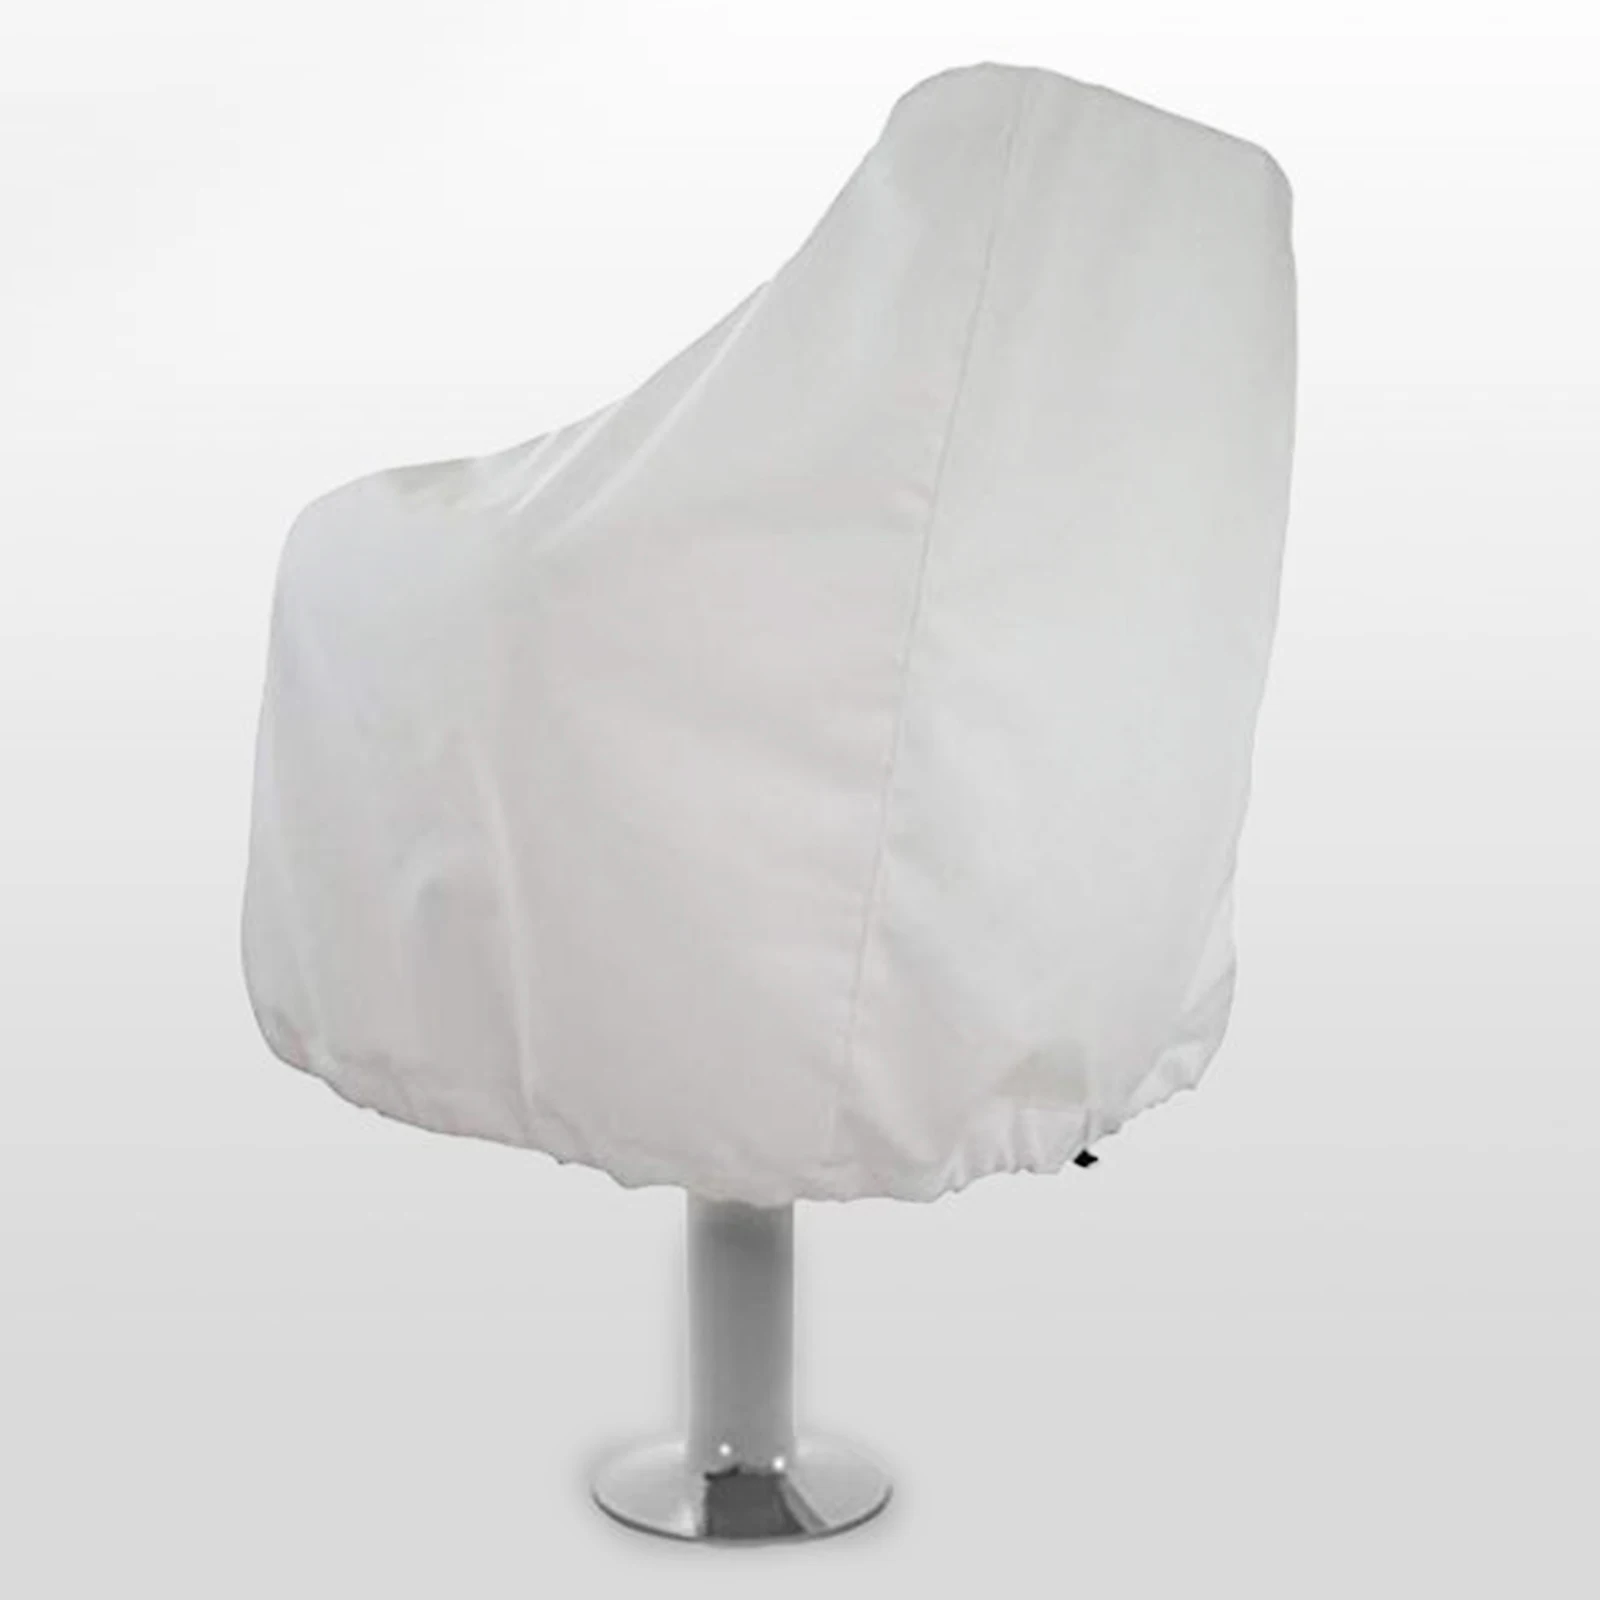 High Quality Outdoor Yacht Ship Boat Seat Cover Waterproof Protective Sun proof UV Protection Marine Yacht Boat Accessories